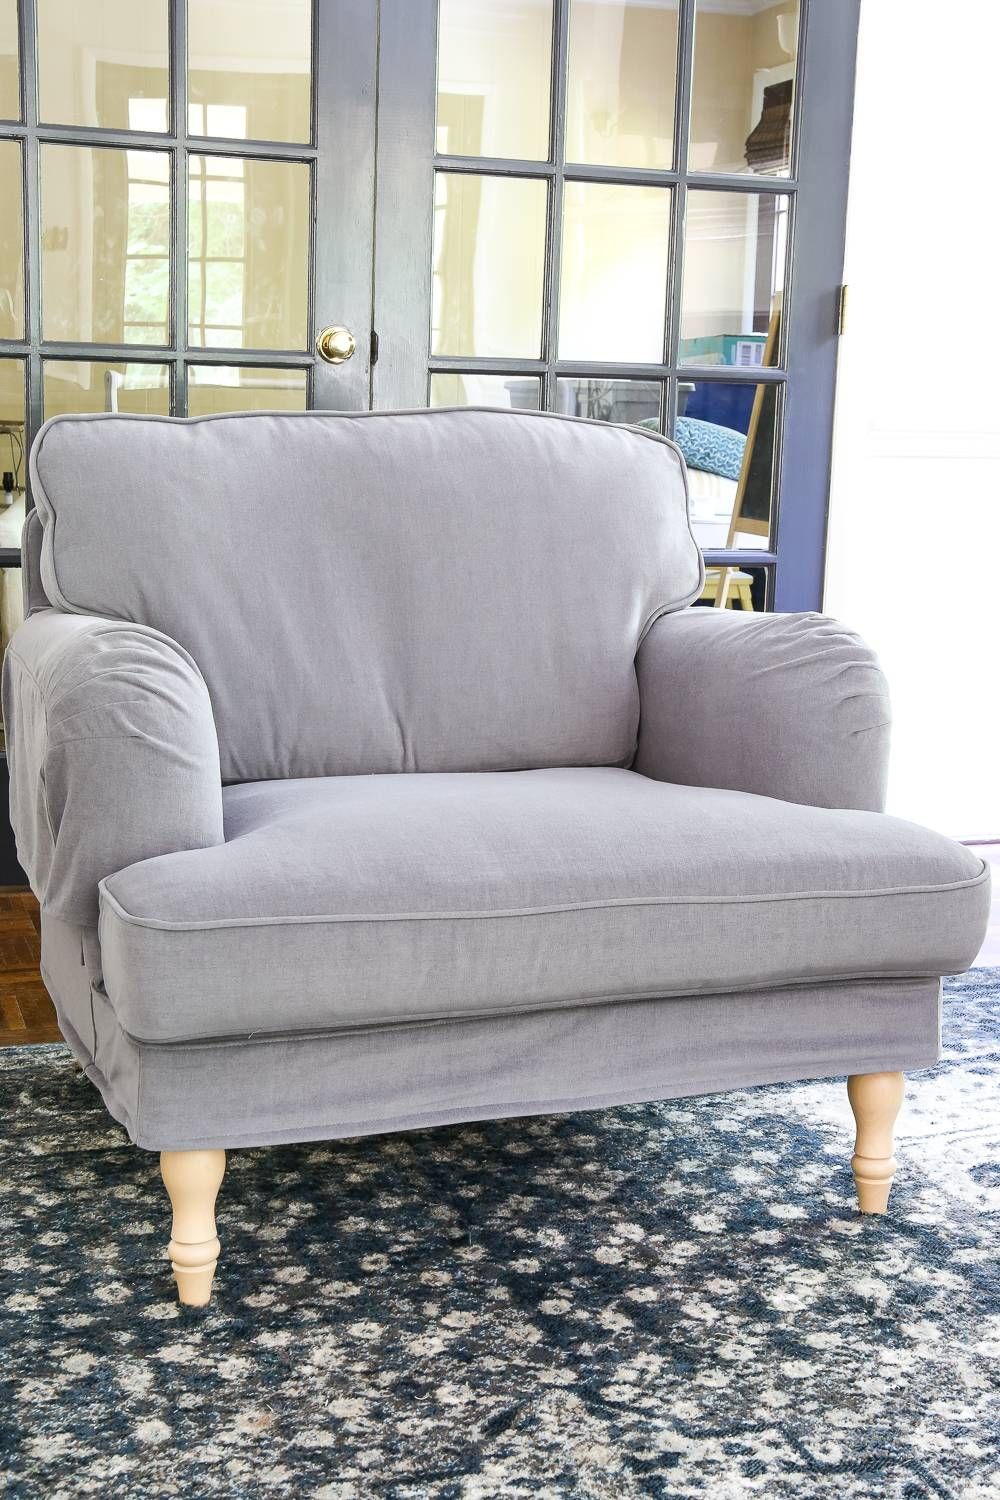 Ikea's New Sofa And Chairs And How To Keep Them Clean – Bless'er House Pertaining To Sofa Chairs Ikea (View 4 of 30)